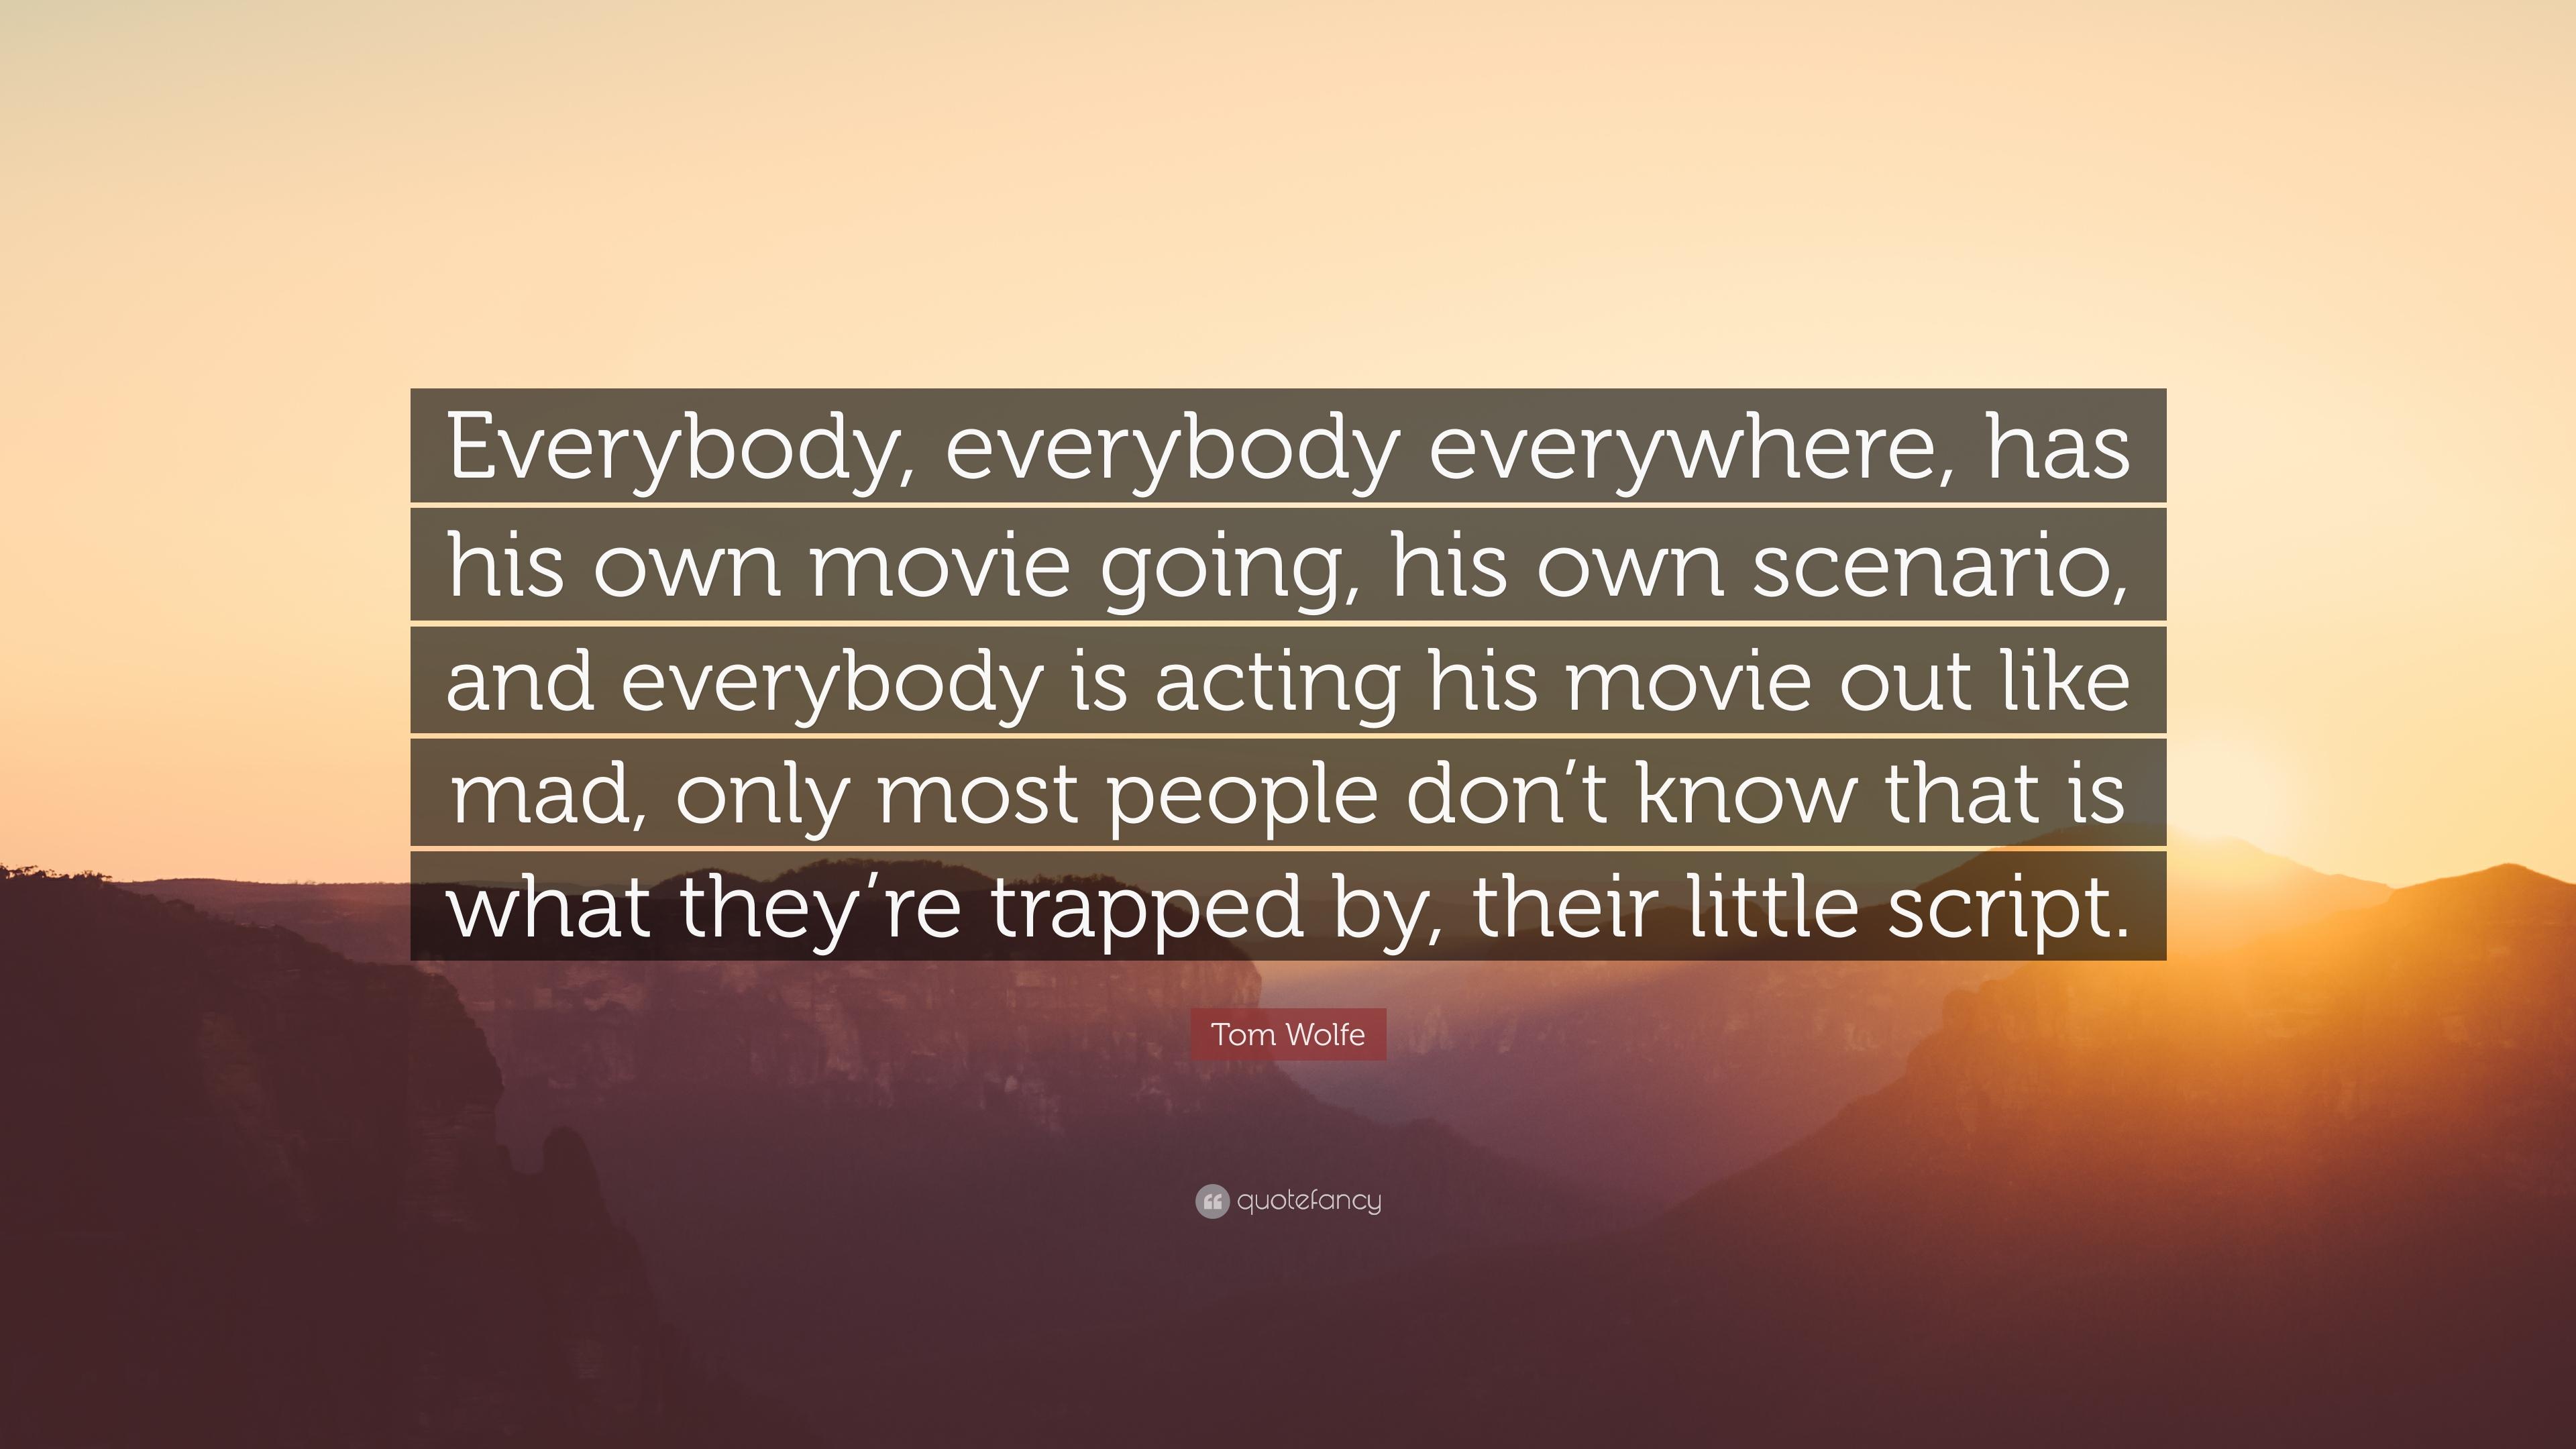 Tom Wolfe Quote: “Everybody, everybody everywhere, has his own movie